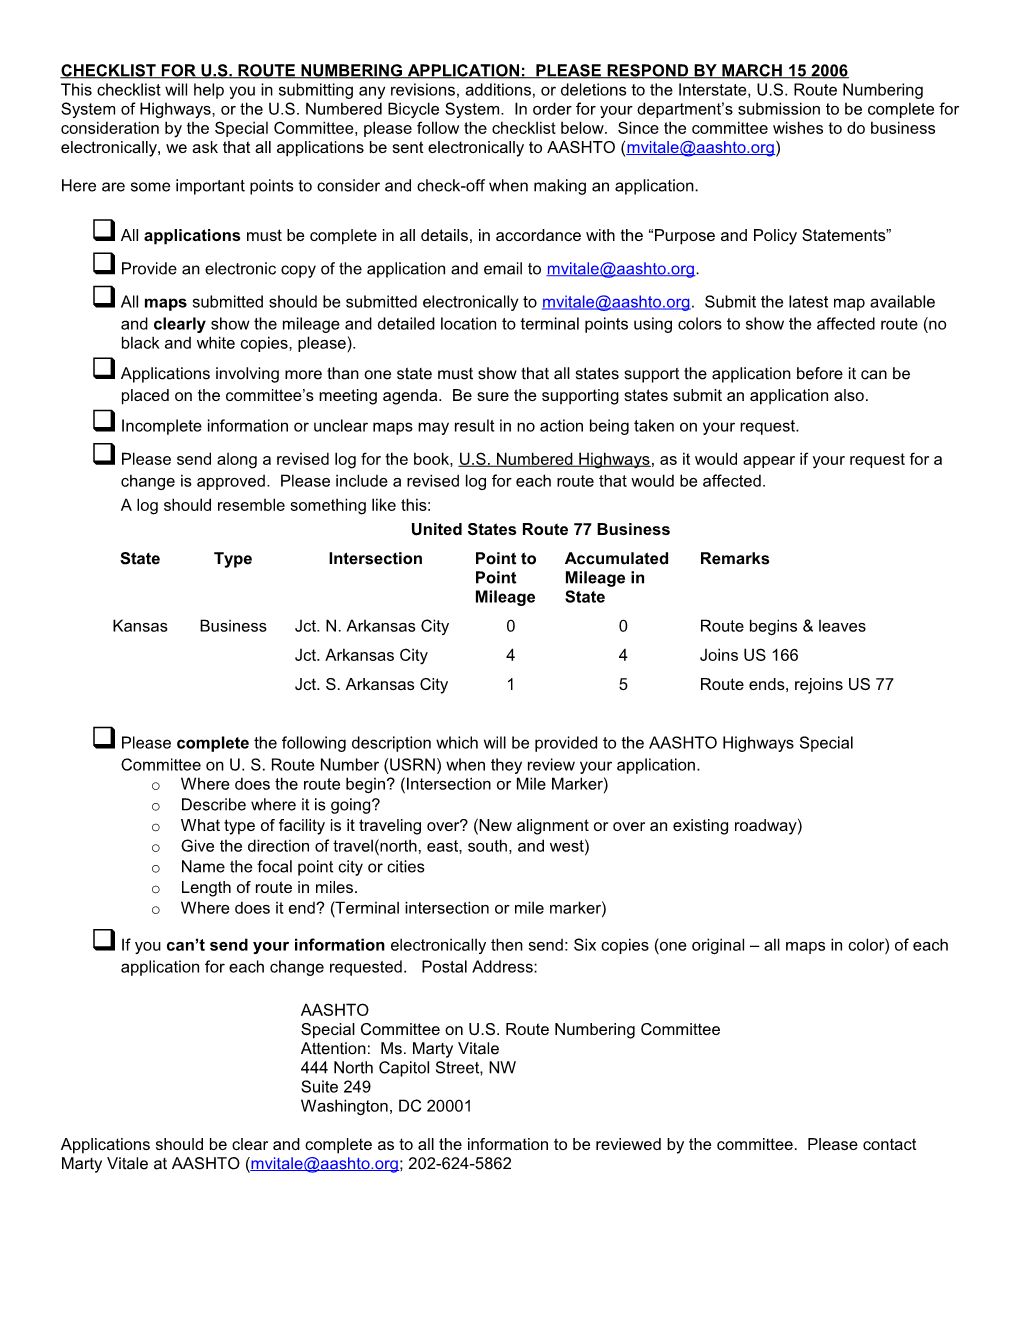 Use Checklist When Applying for US Route Number